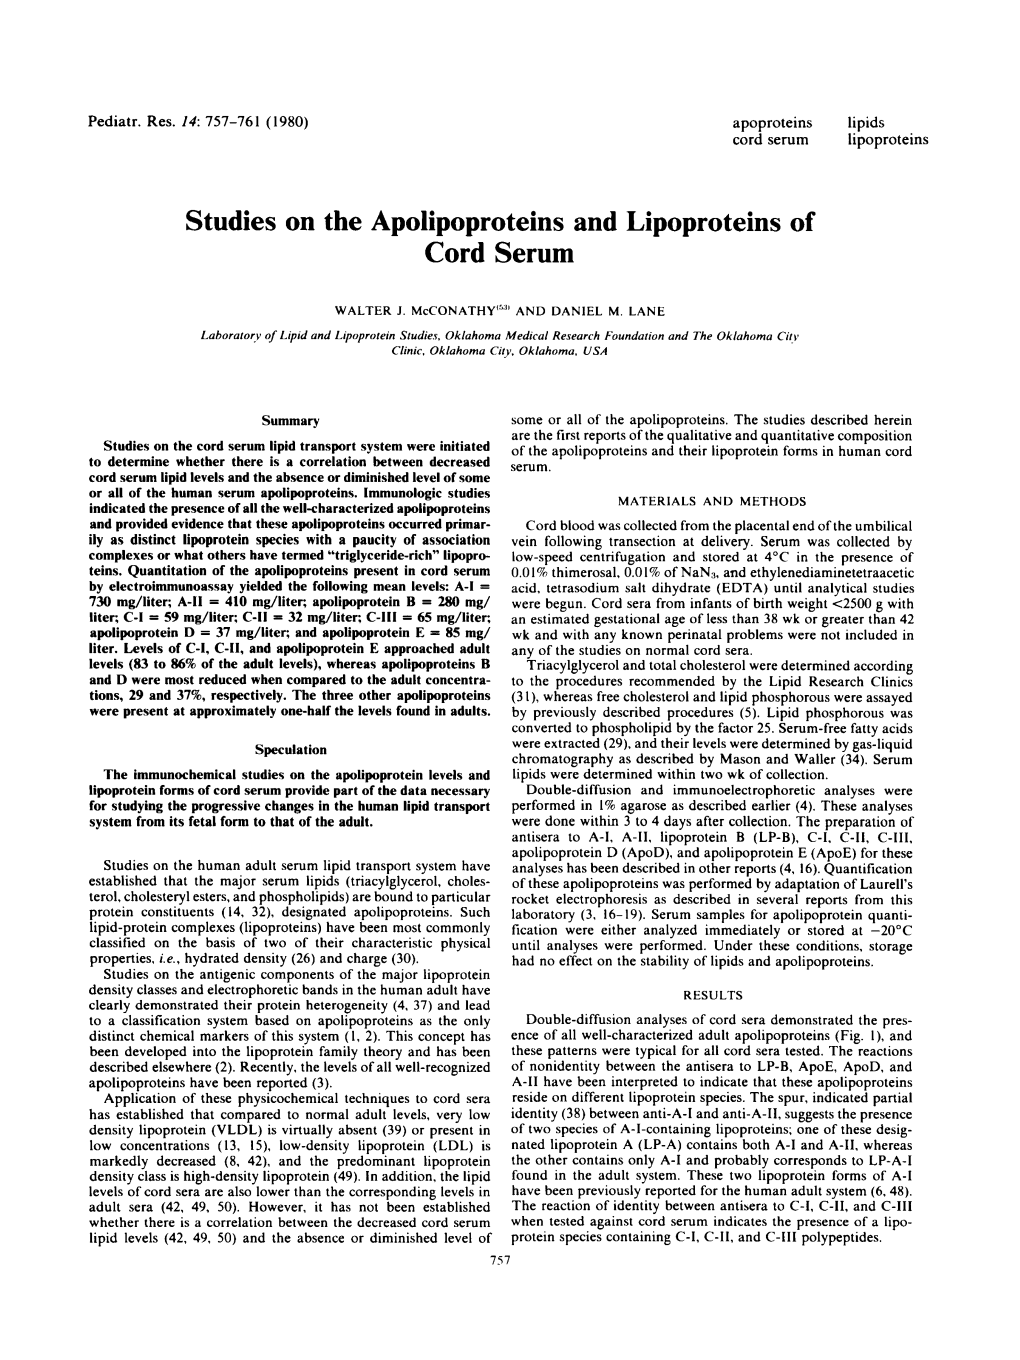 Studies on the Apolipoproteins and Lipoproteins of Cord Serum